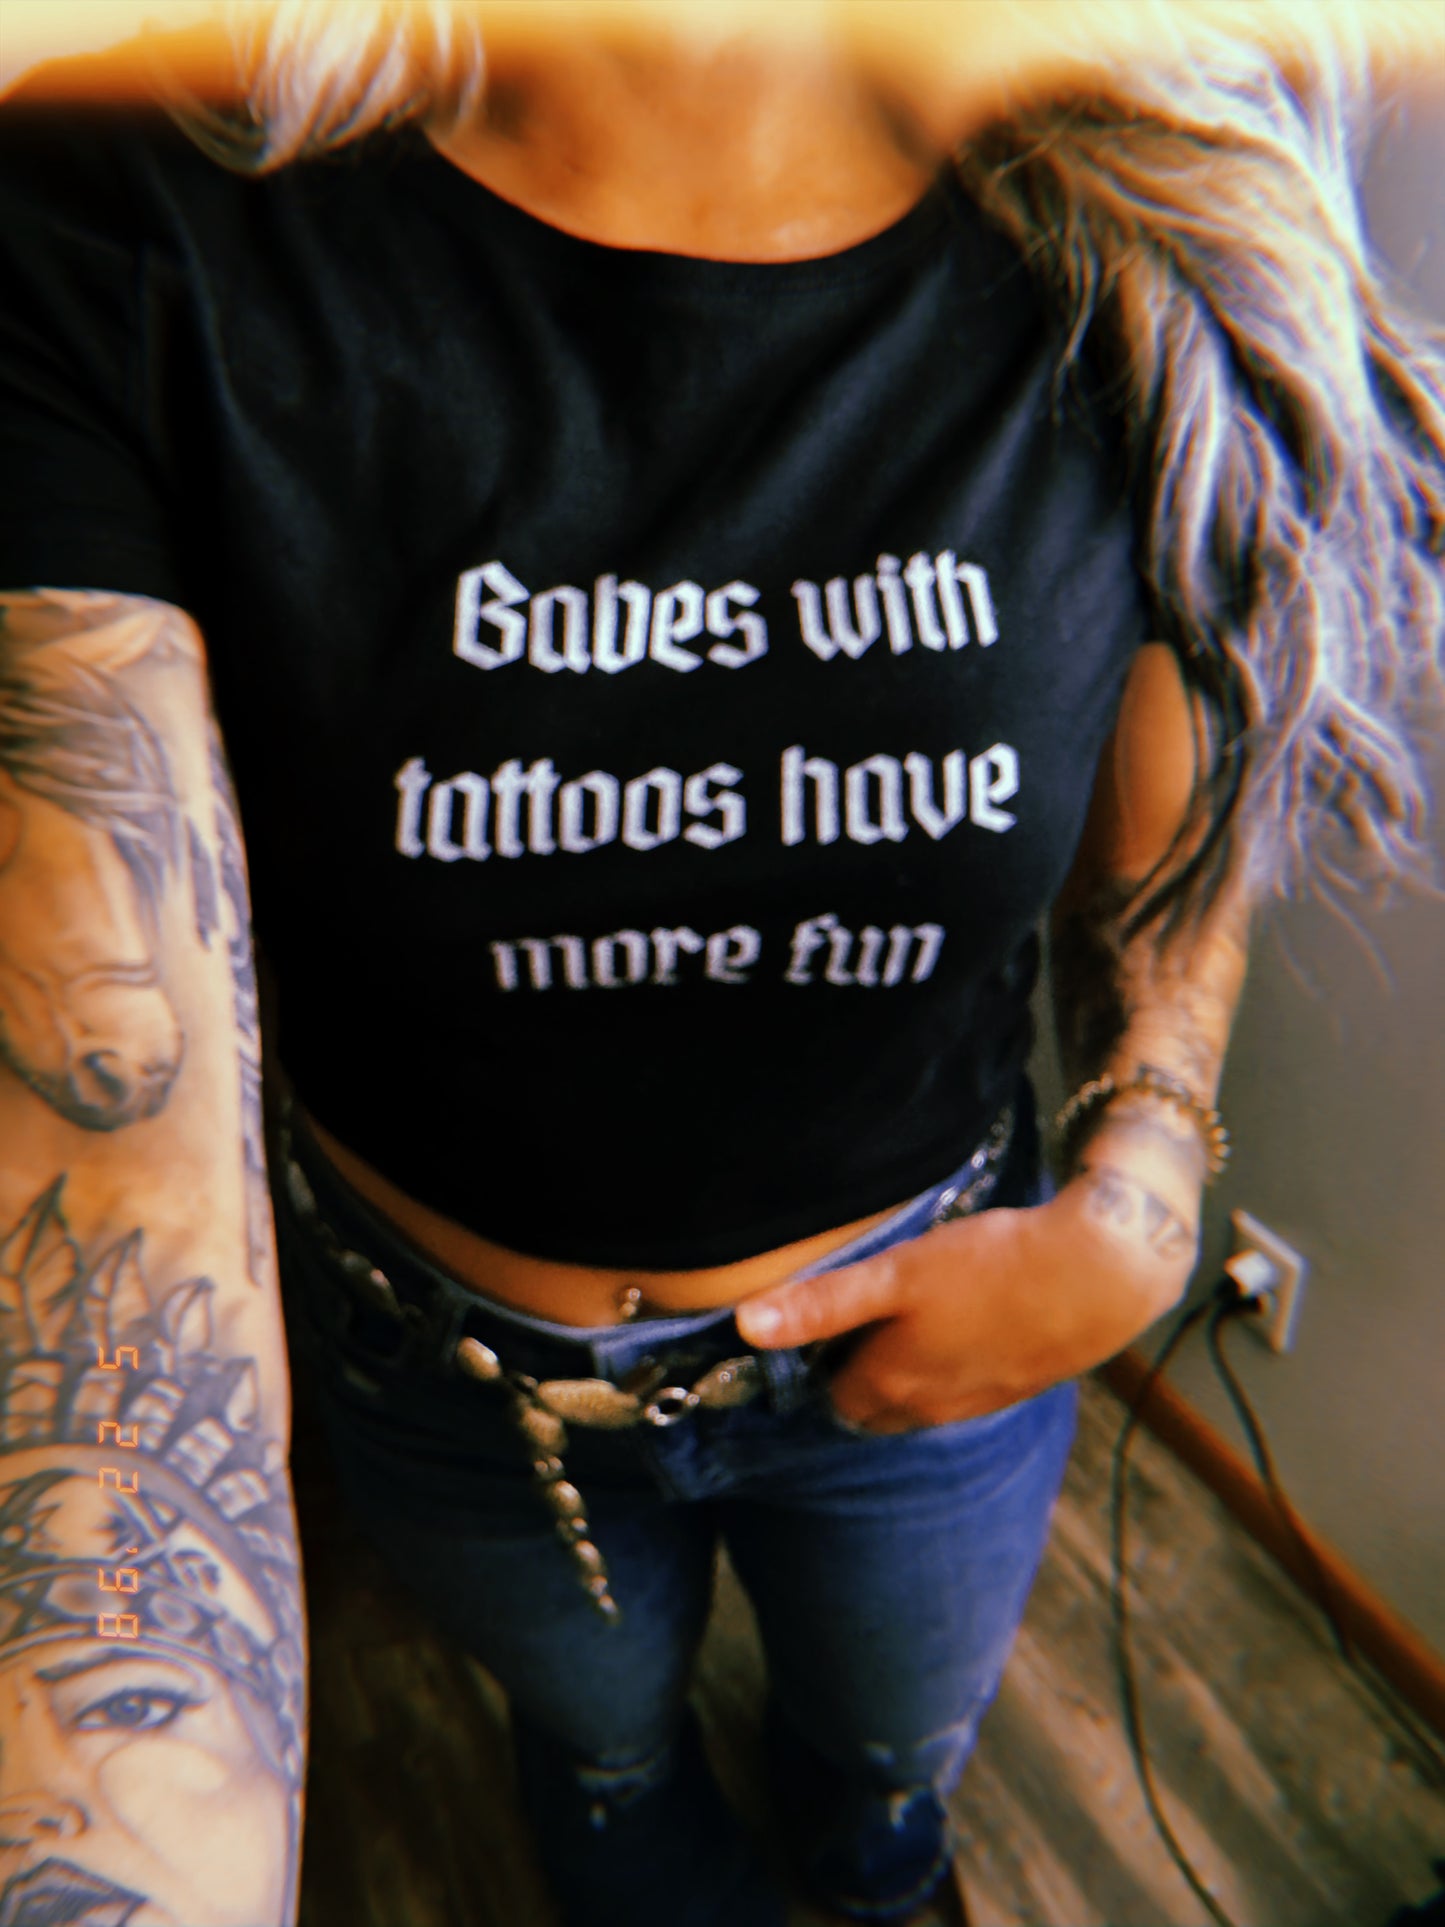 Babes With Tattoos Have More Fun Graphic Tee